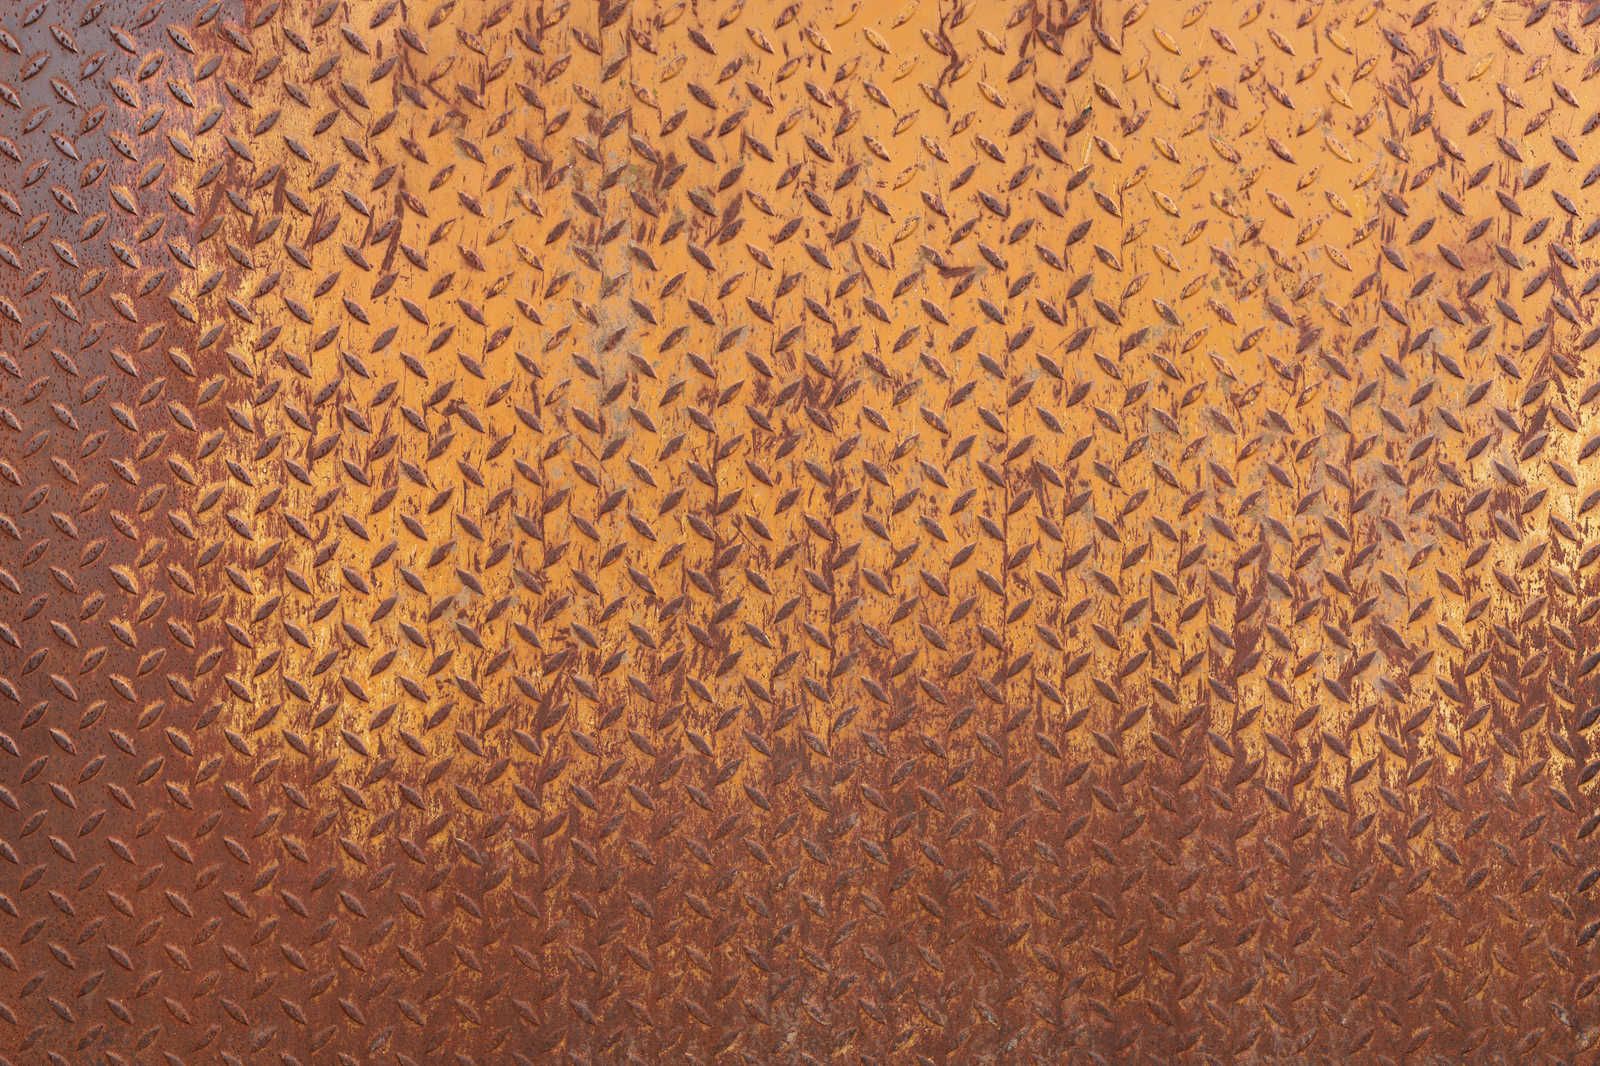             Metal Canvas Painting Steel Plate Rust with Diamond Pattern - 1.20 m x 0.80 m
        